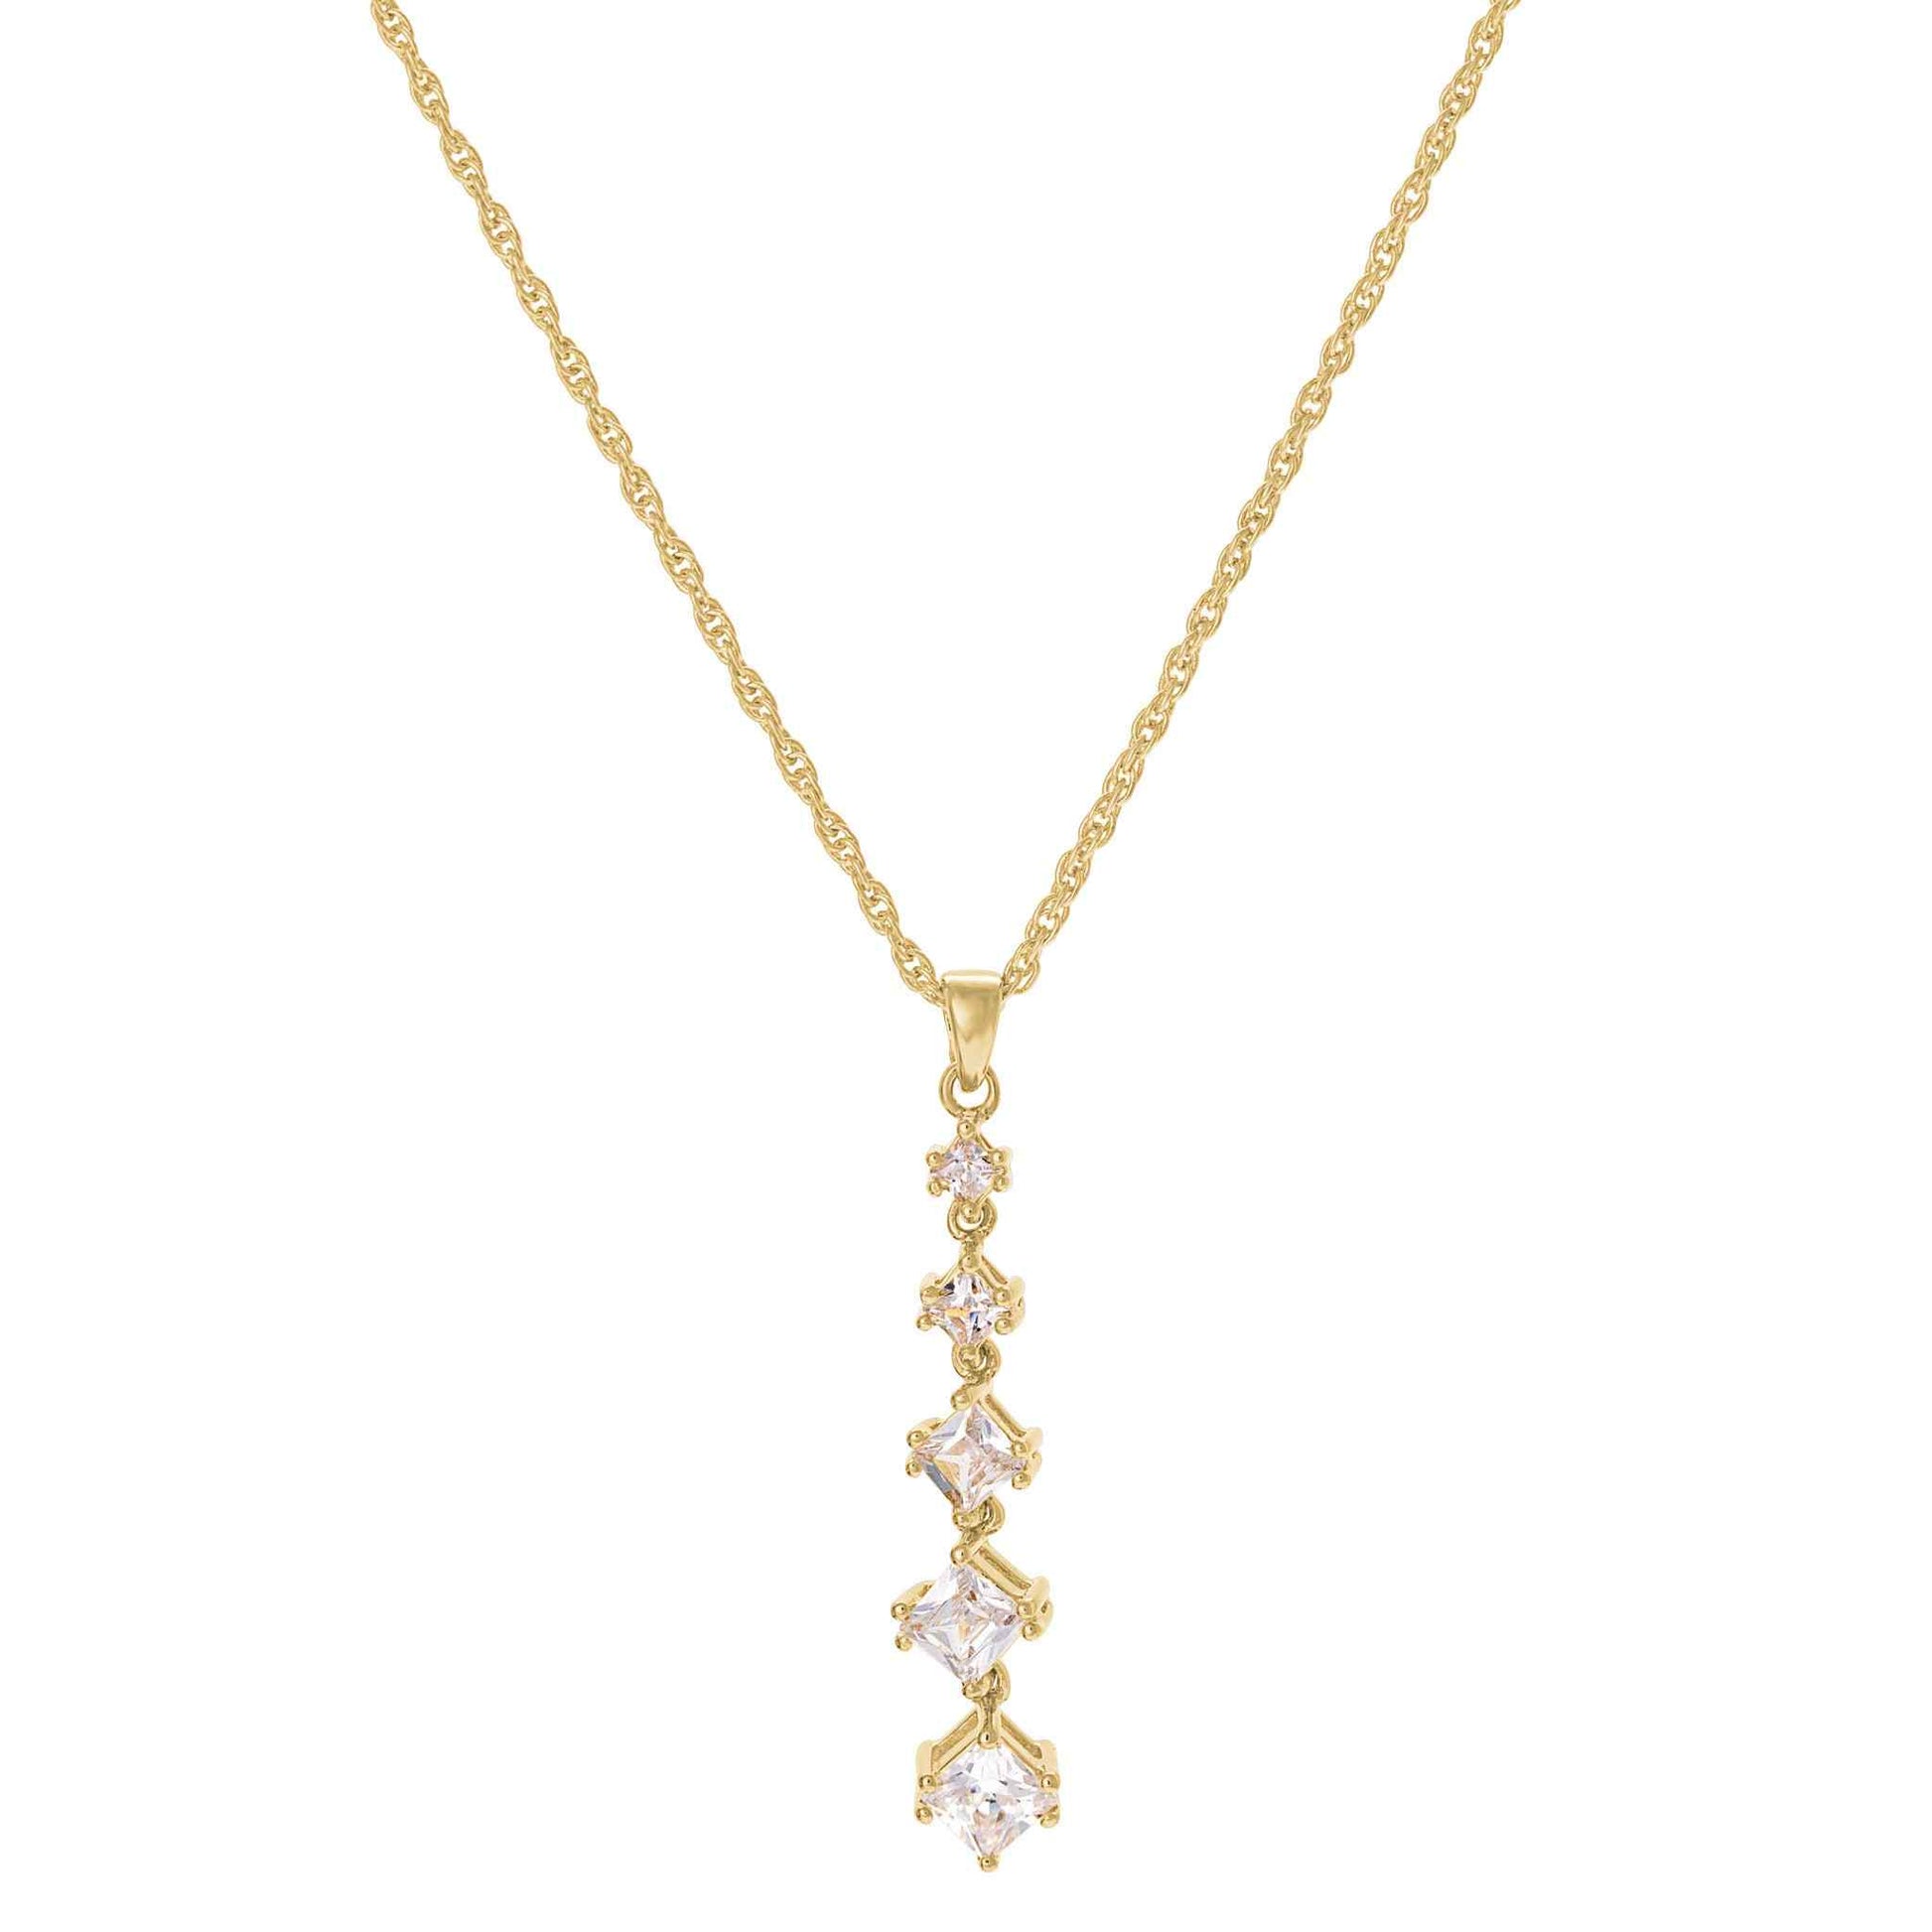 A princess cut simulated diamond journey necklace displayed on a neutral white background.